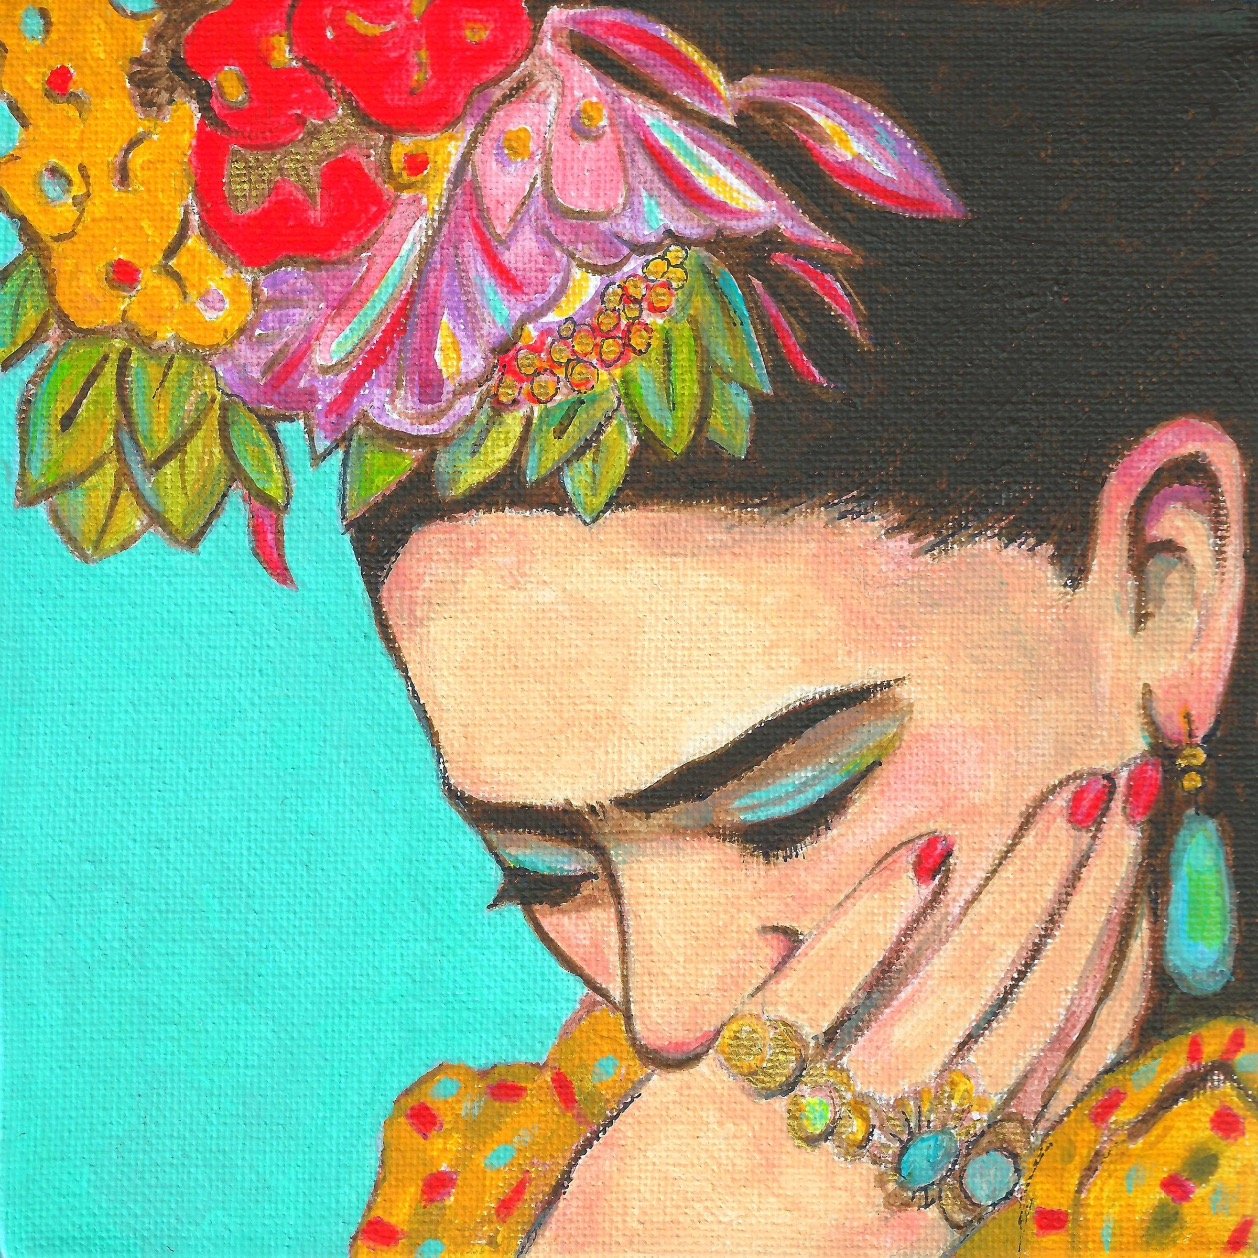 I am an artist and lover of beauty and Mexican culture. My muse is Frida and inspiration for my art. Visit my shop at https://t.co/0NrQtv59D7